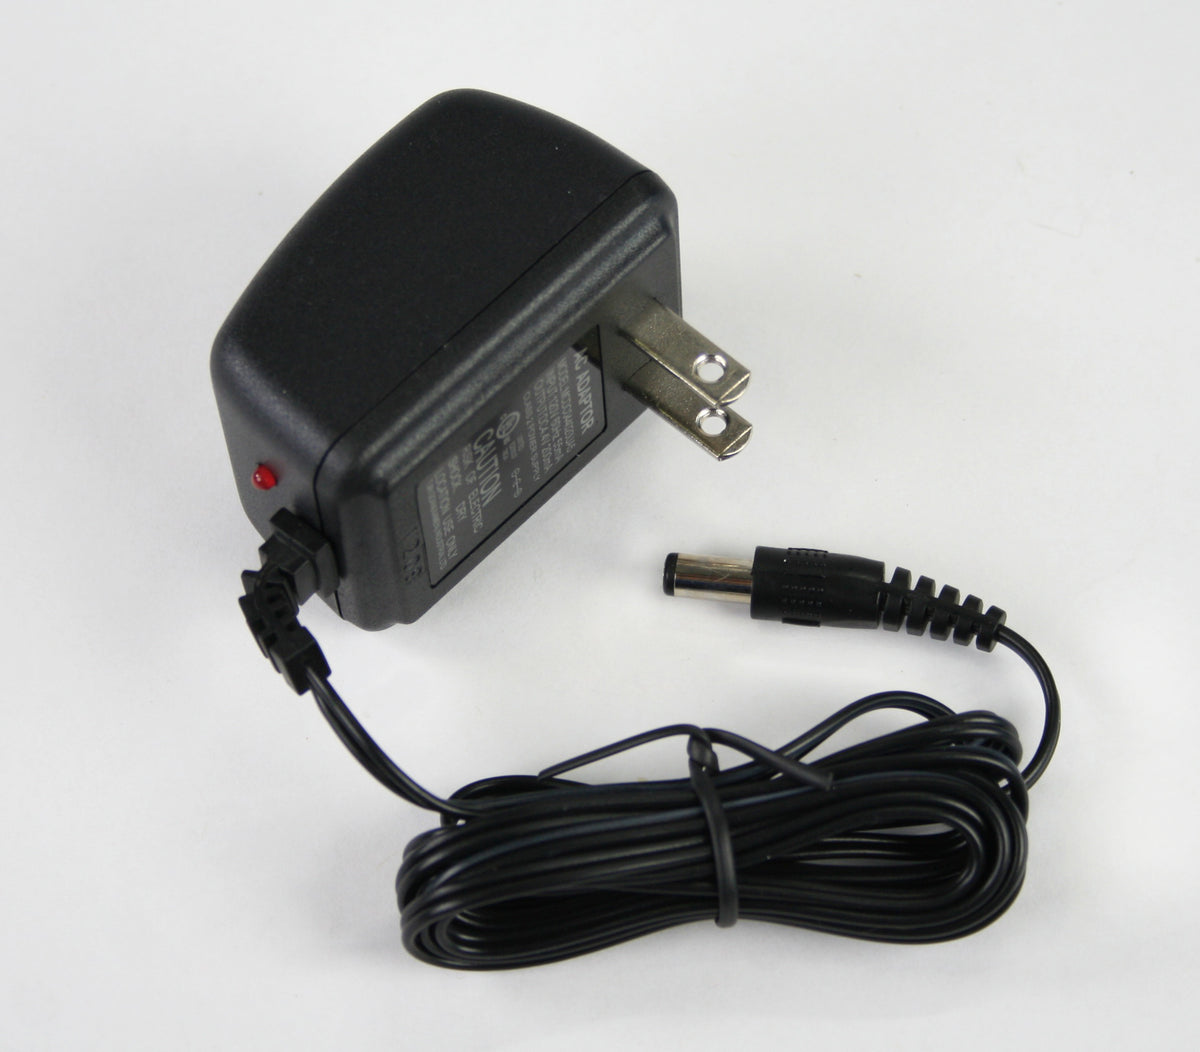 Power Adapter for Microscopes with Batteries - 802-002